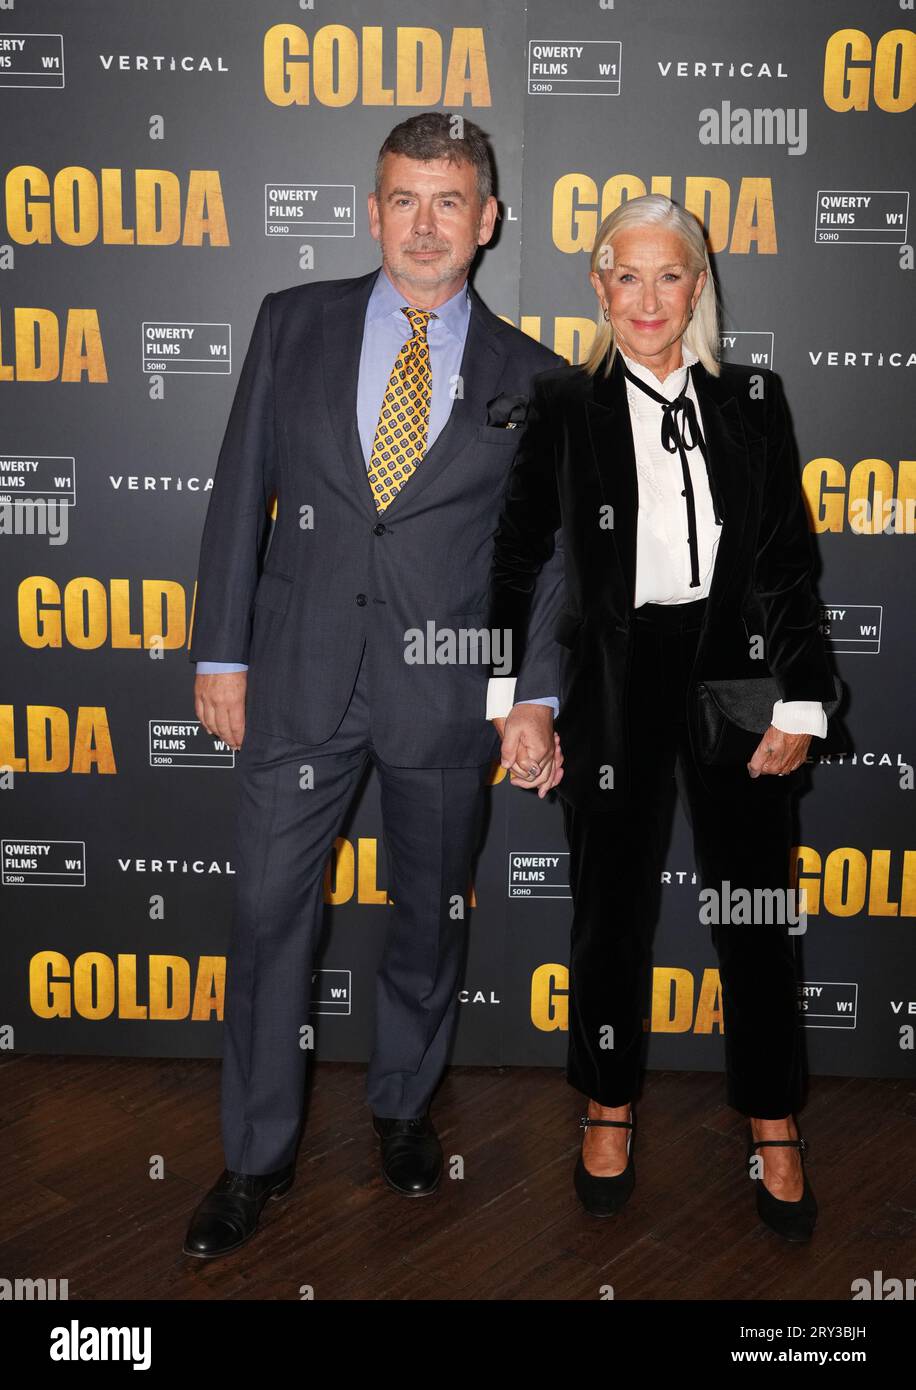 https://c8.alamy.com/comp/2RY3BJH/writer-nicholas-martin-and-dame-helen-mirren-attending-a-special-screening-for-the-film-golda-at-the-picturehouse-central-cinema-london-picture-date-thursday-september-28-2023-2RY3BJH.jpg